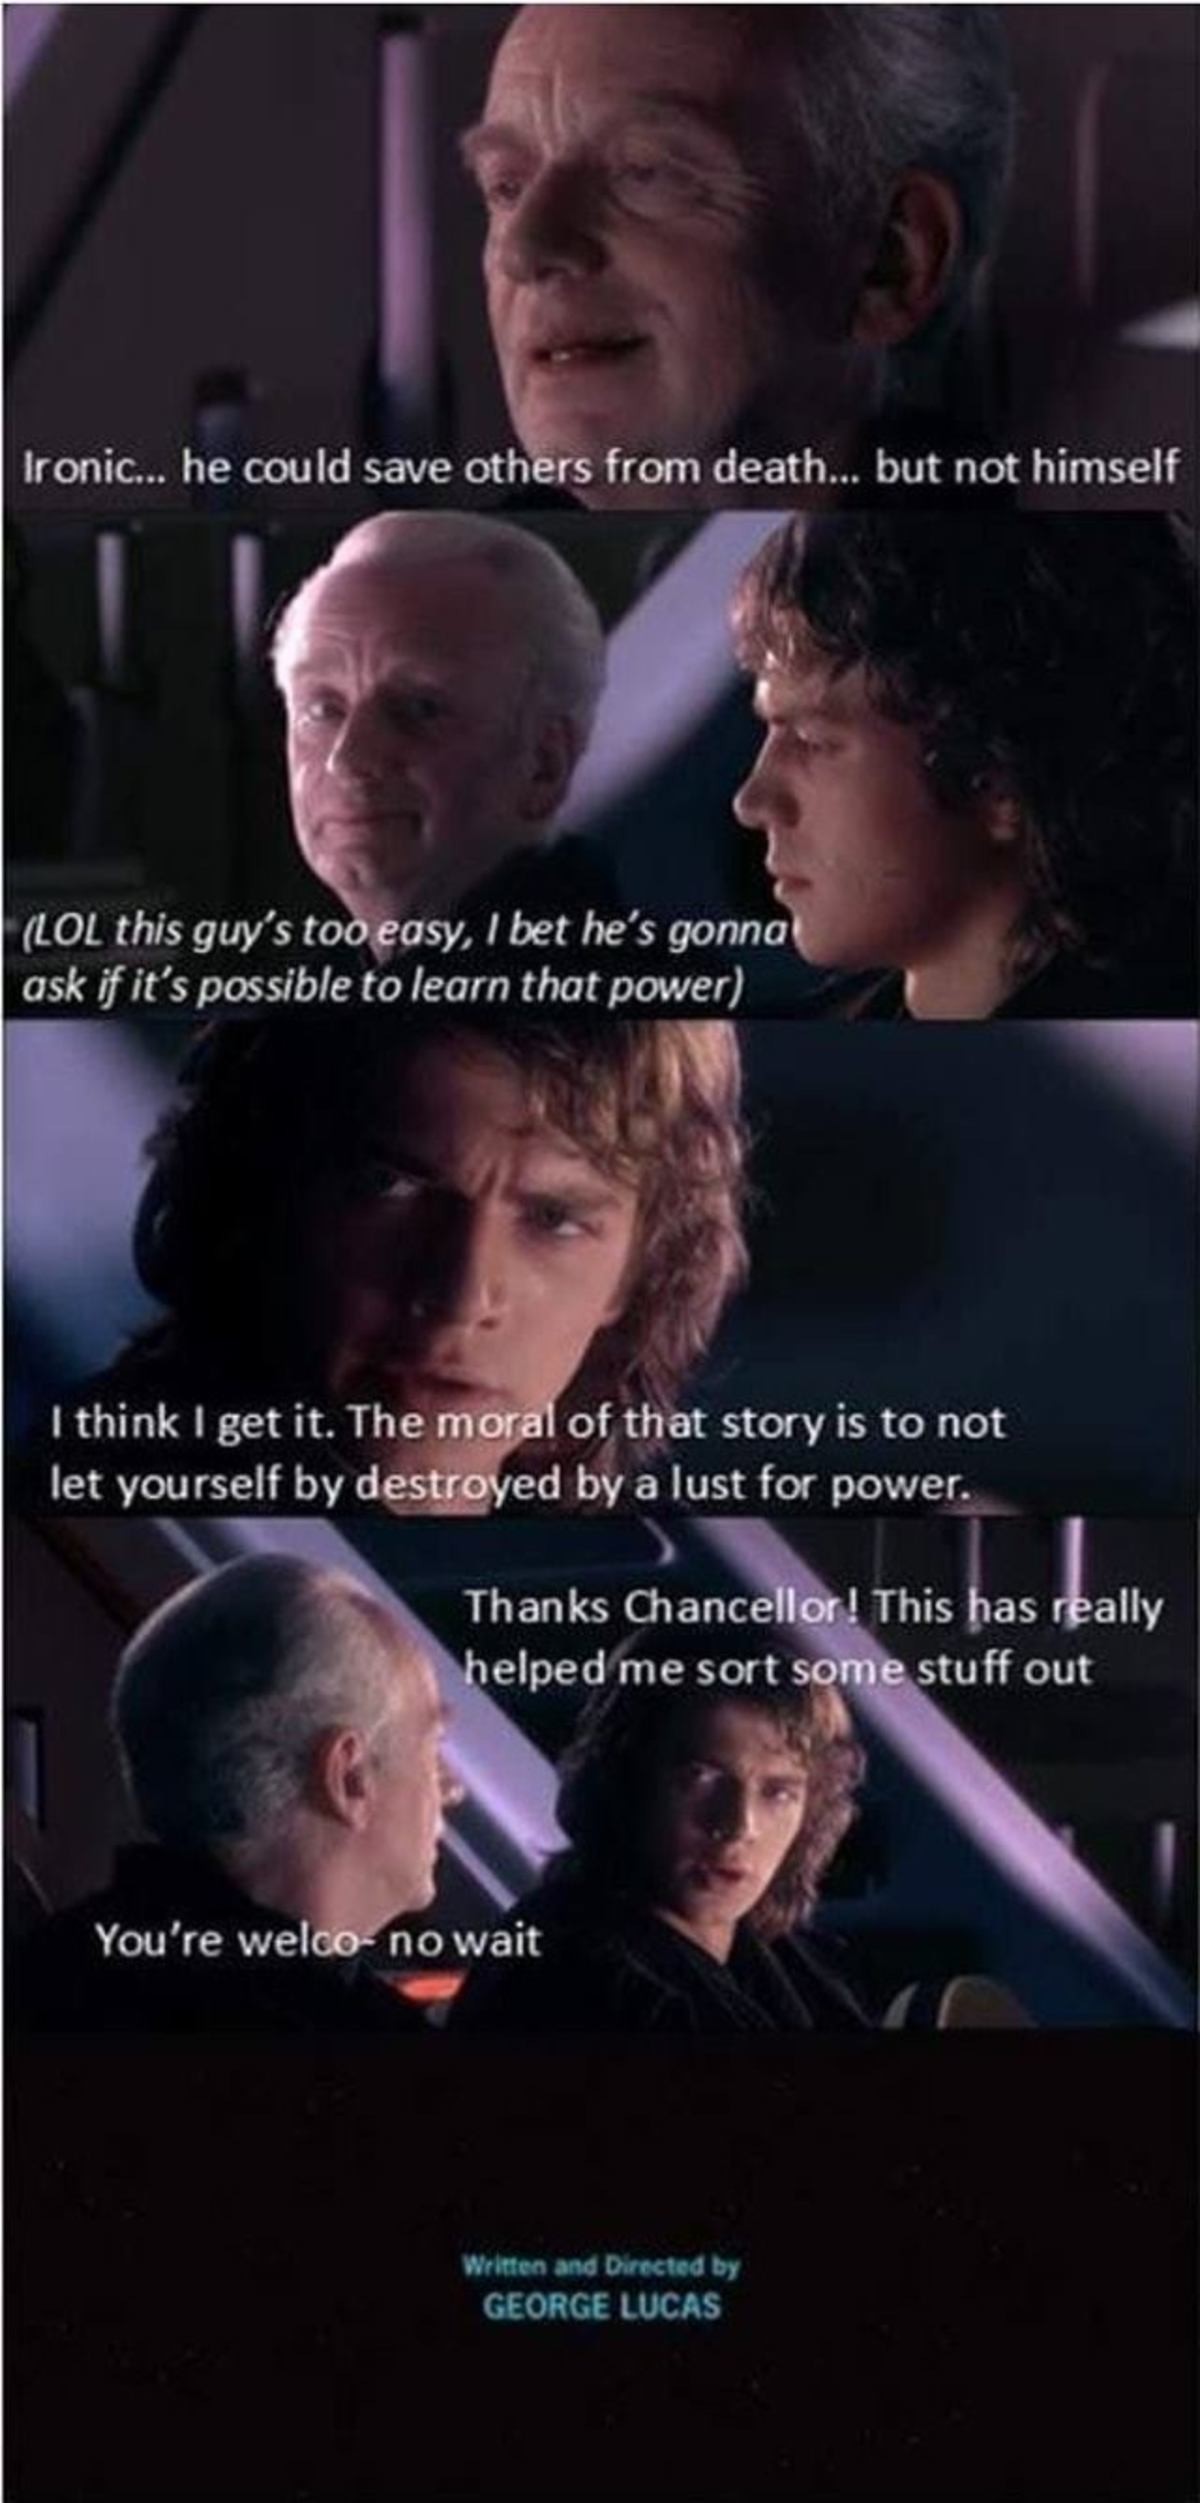 star wars ending meme - Ironic... he could save others from death... but not himself Lol this guy's too easy, I bet he's gonna ask if it's possible to learn that power I think I get it. The moral of that story is to not let yourself by destroyed by a lust